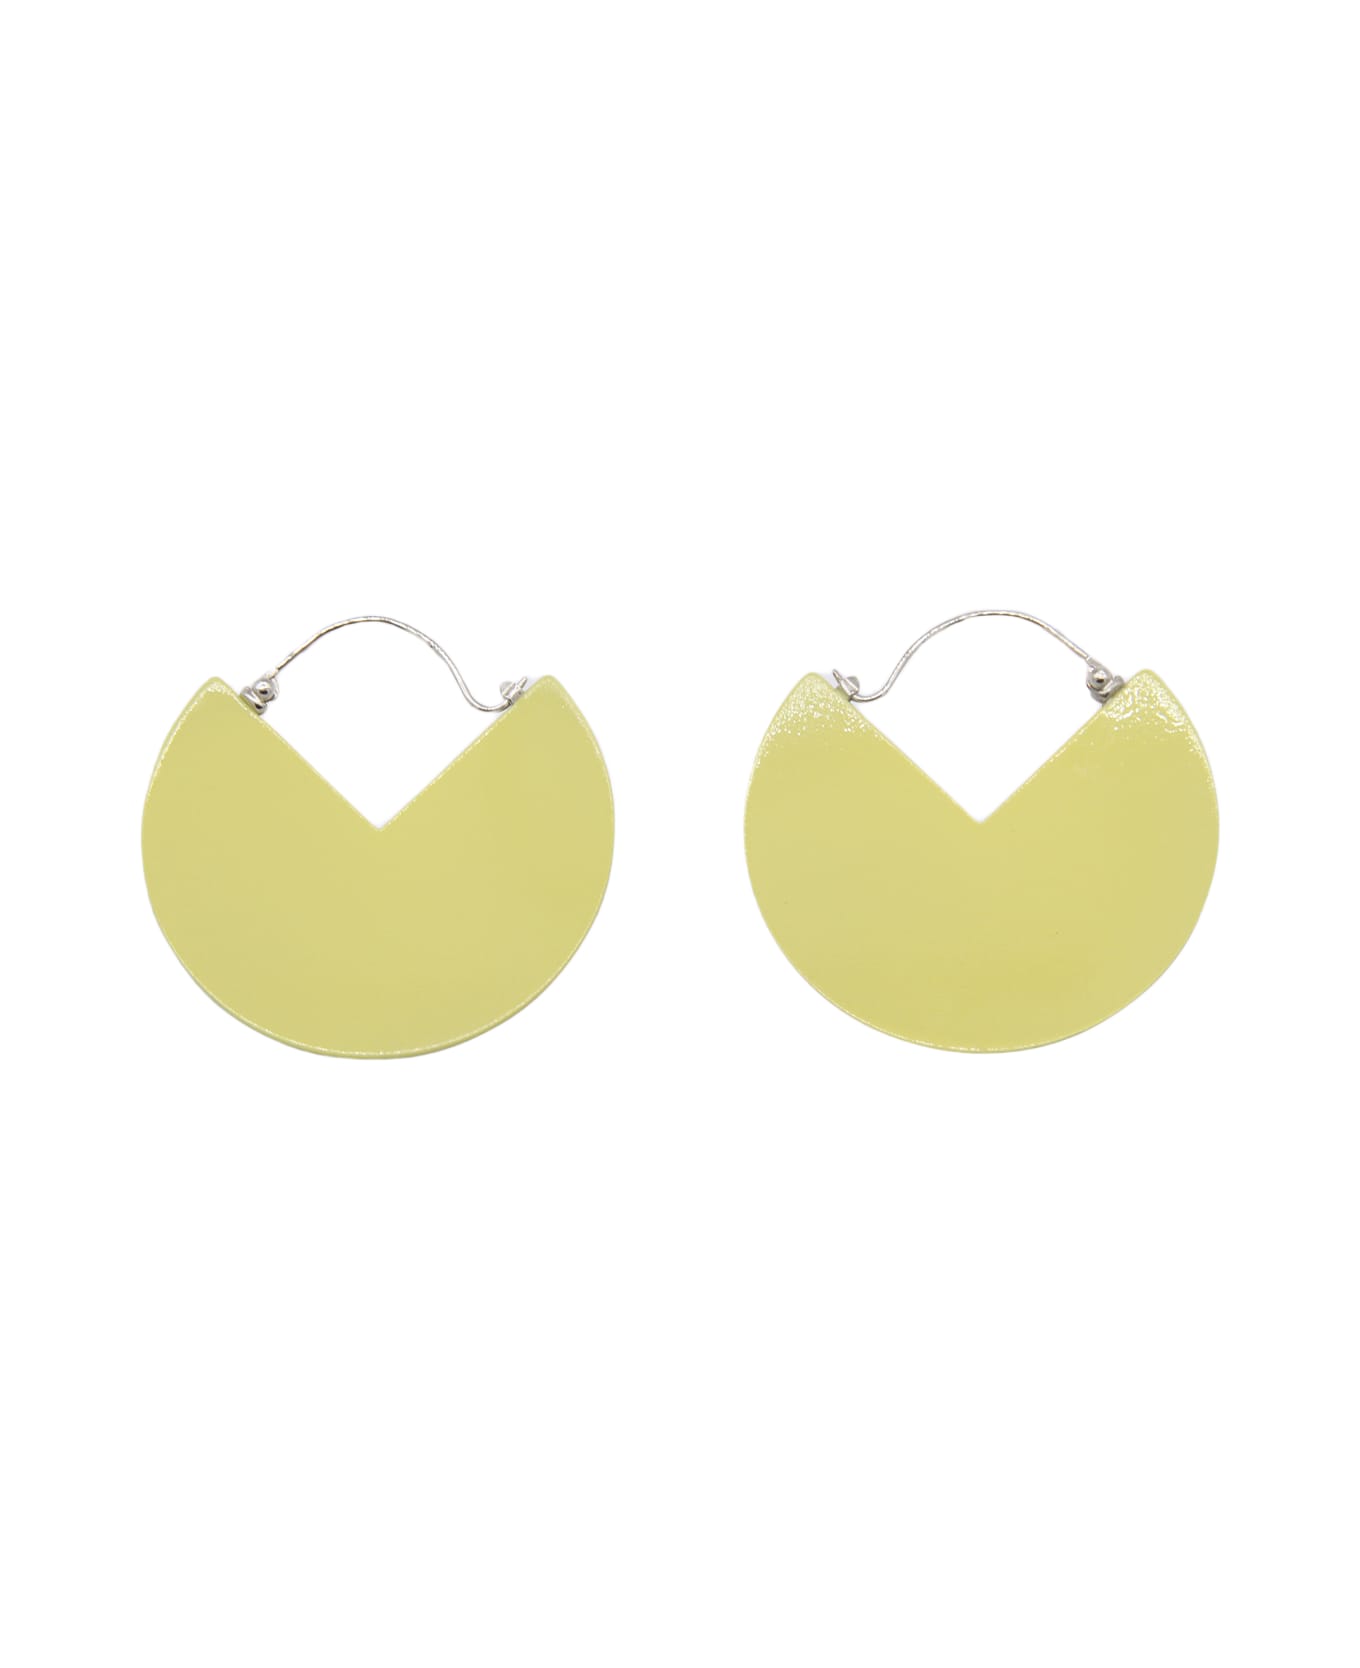 Isabel Marant Light Yellow And Silver '90 Earrings - LIGHT YELLOW/SILVER イヤリング